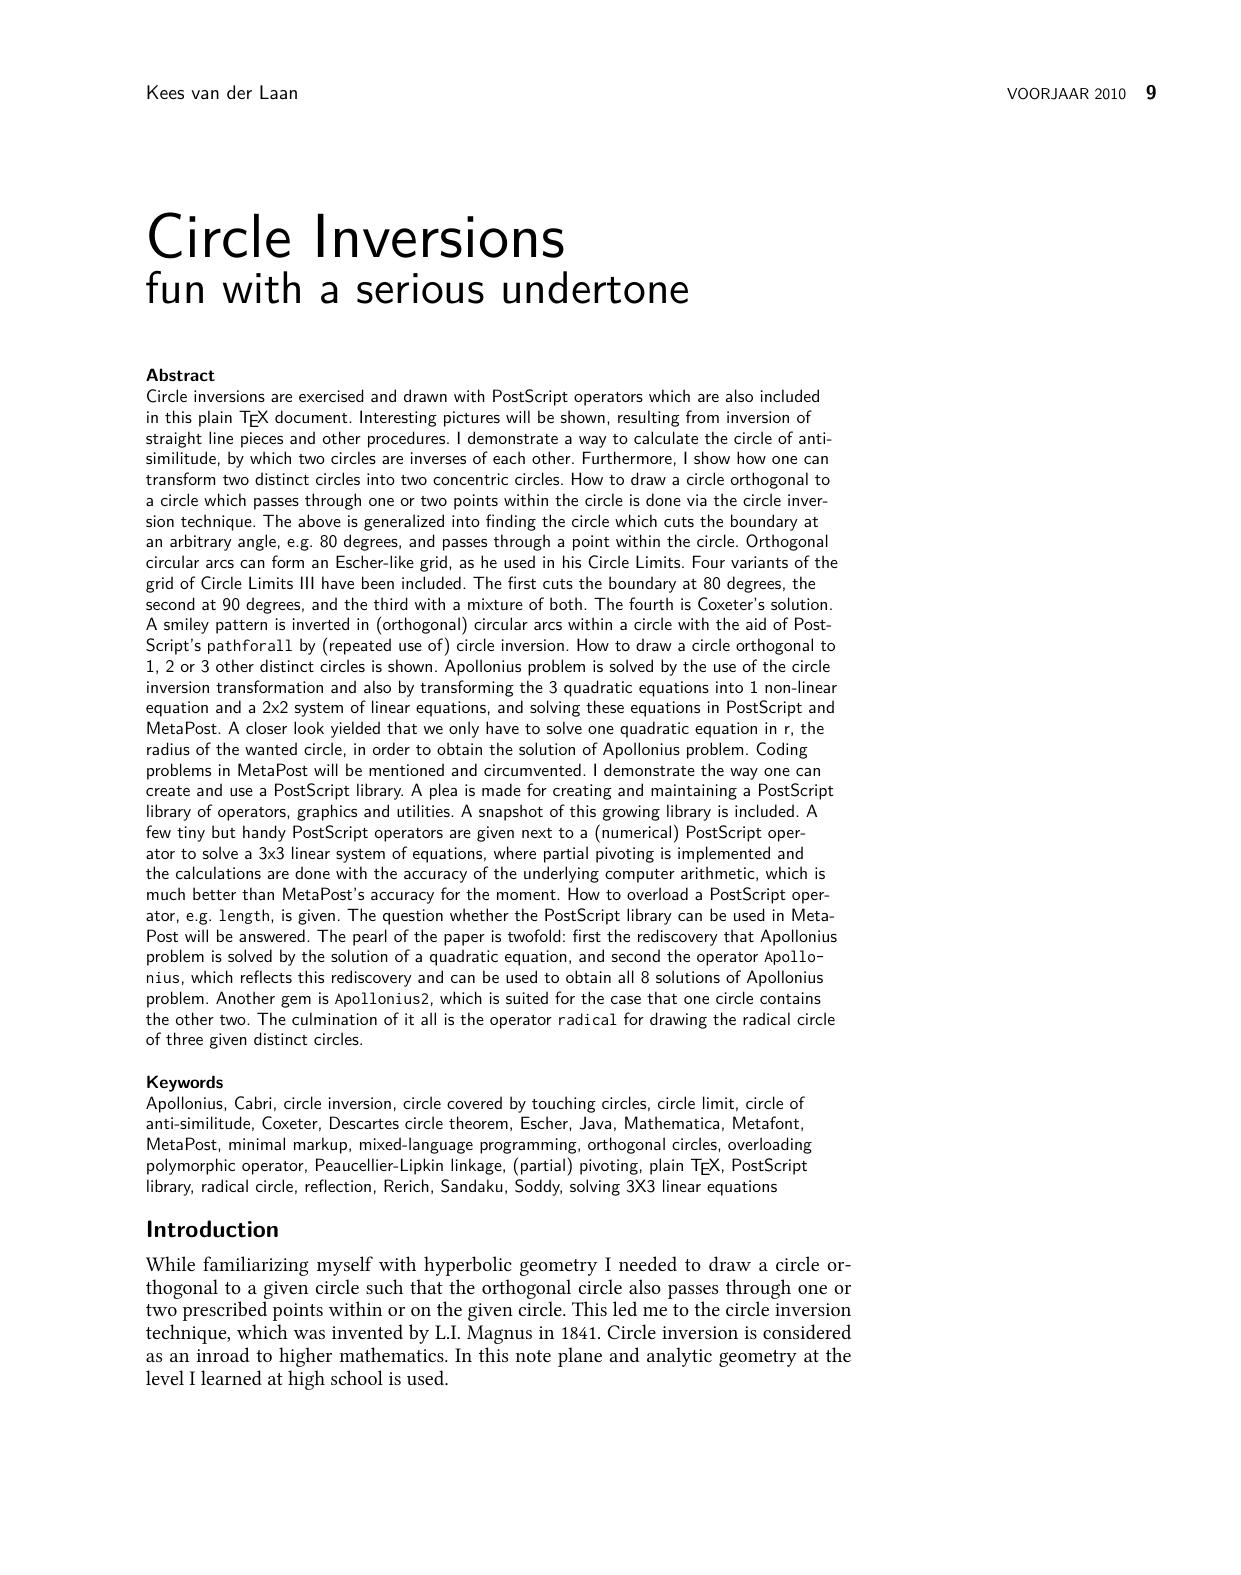 Circle Inversions - fun with a serious undertone (Essay)